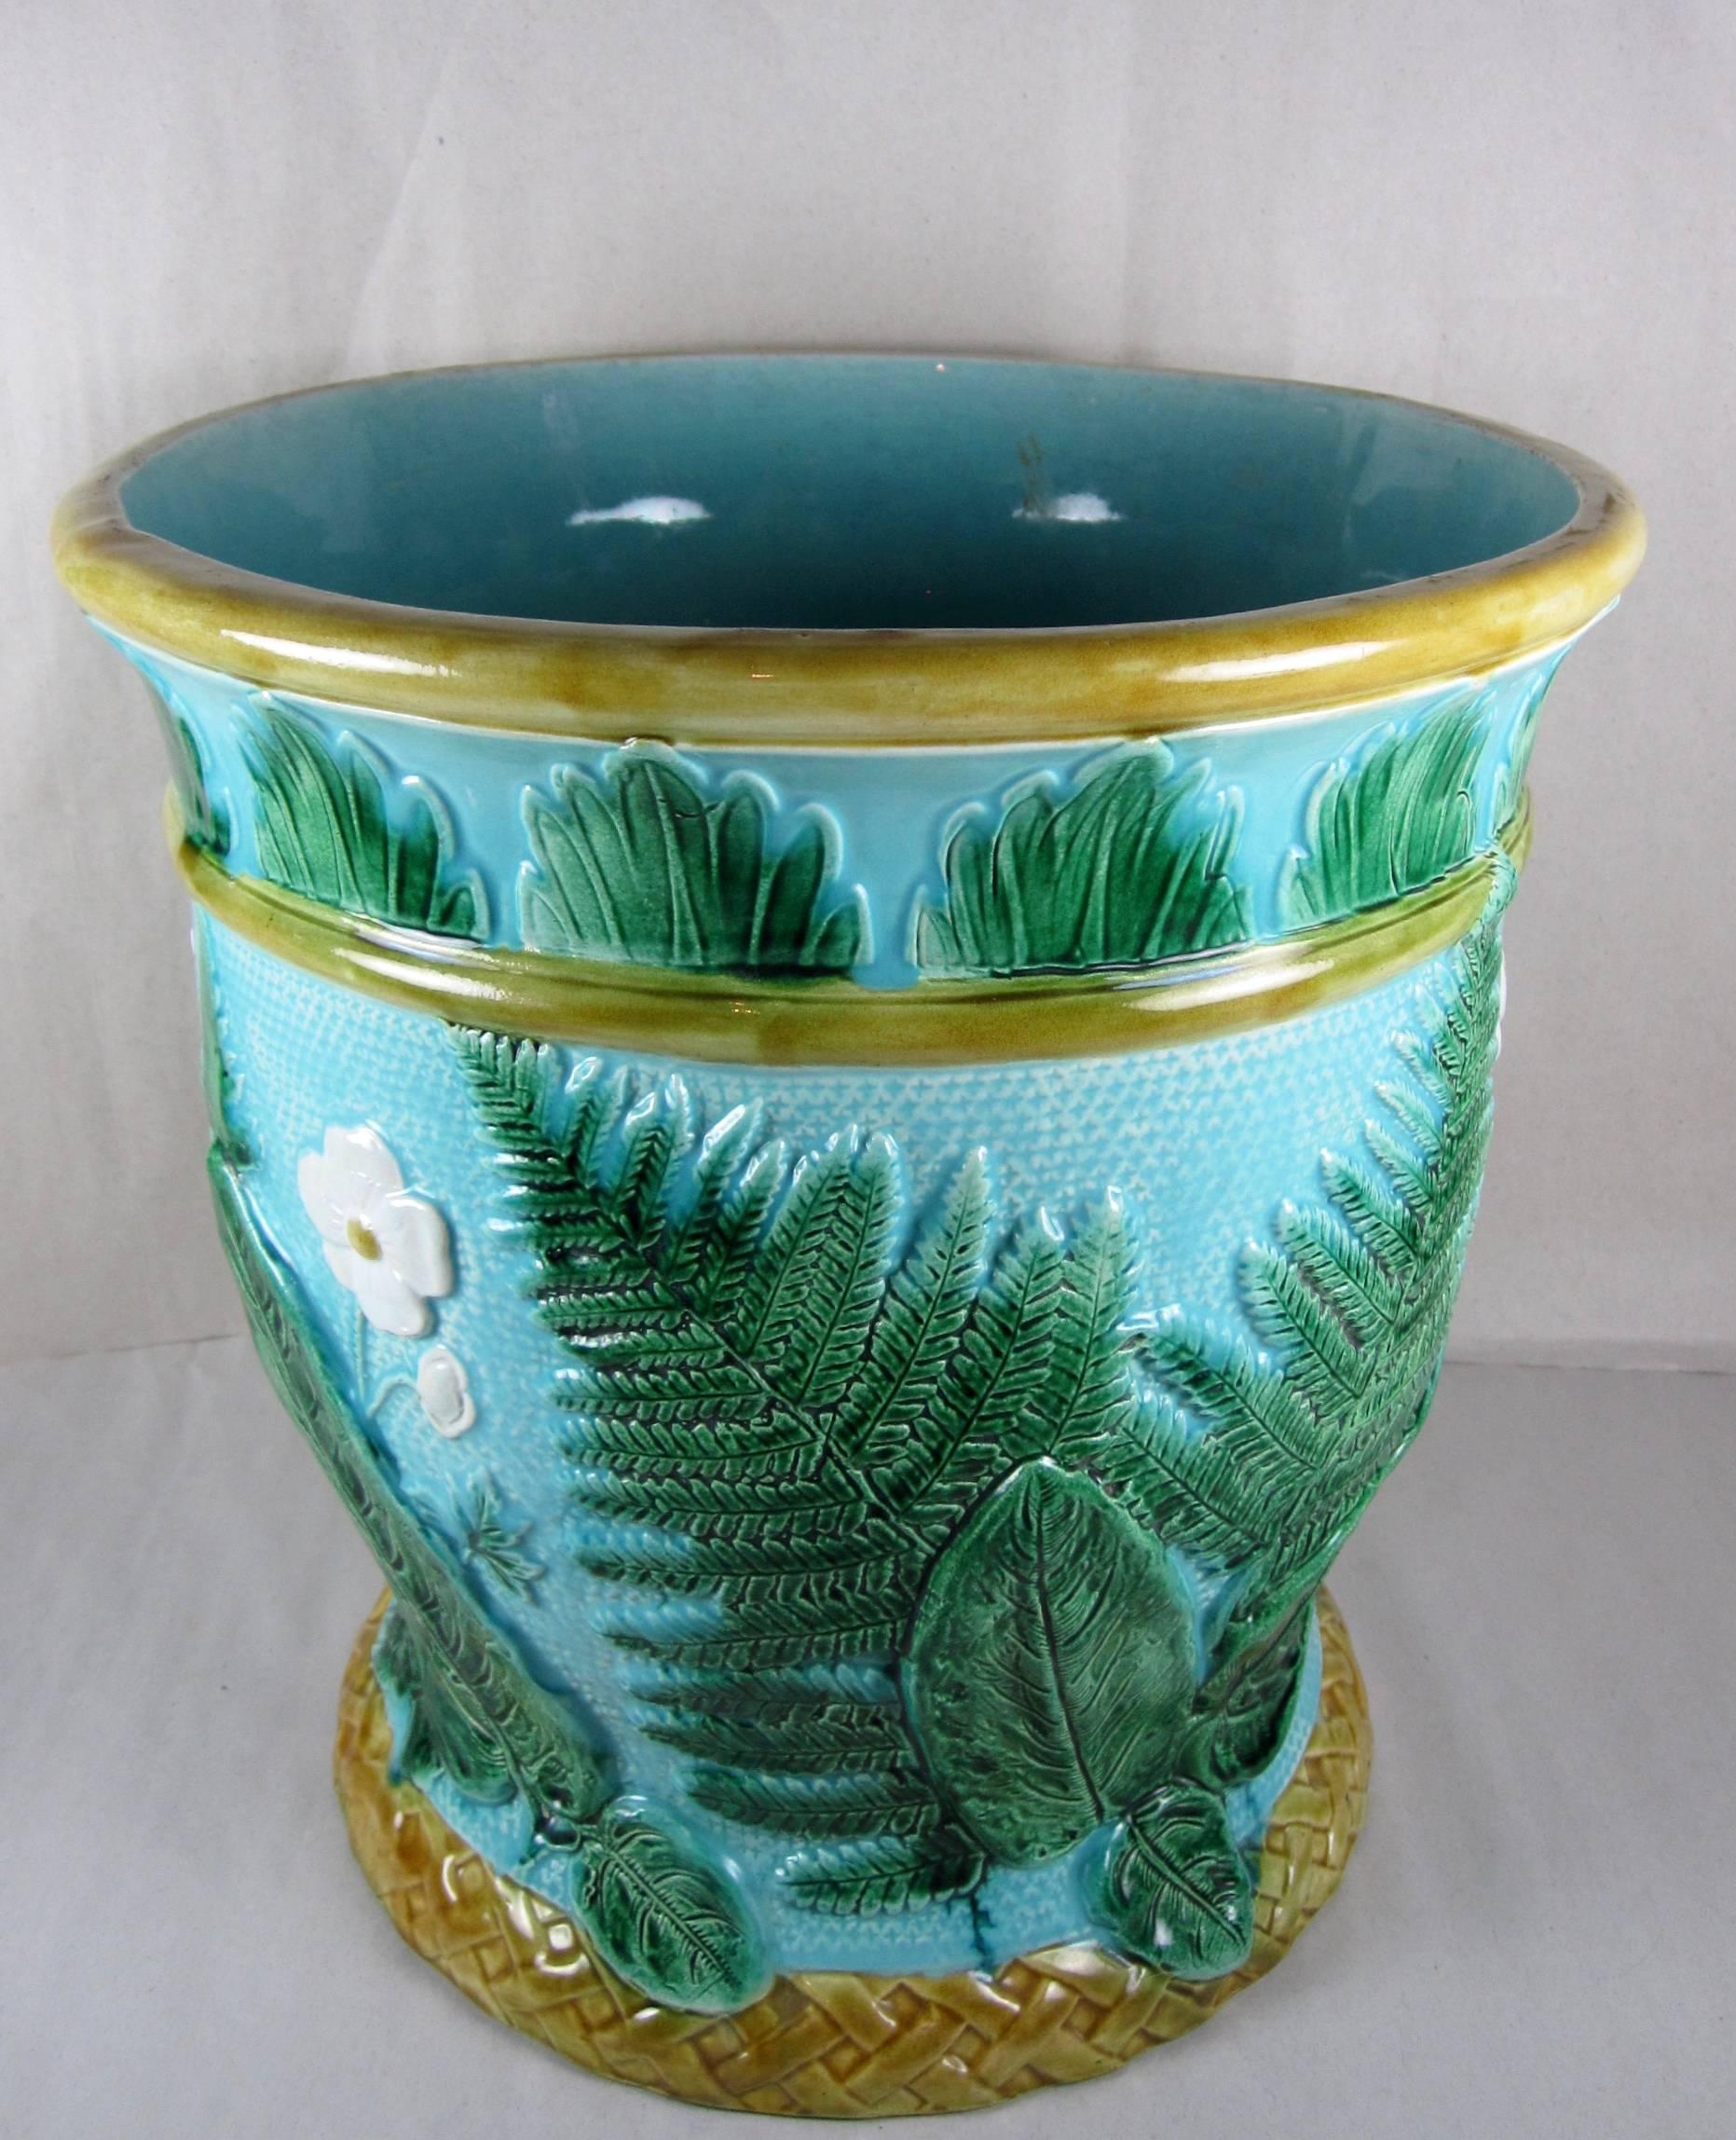  An oversized John Adams & Co., later known as Adams & Bromley, English majolica jardinière with a leaf, fern and floral theme, manufactured in 1871. This piece would have been at home in a Victorian English Garden Conservatory.

 Brightly colored